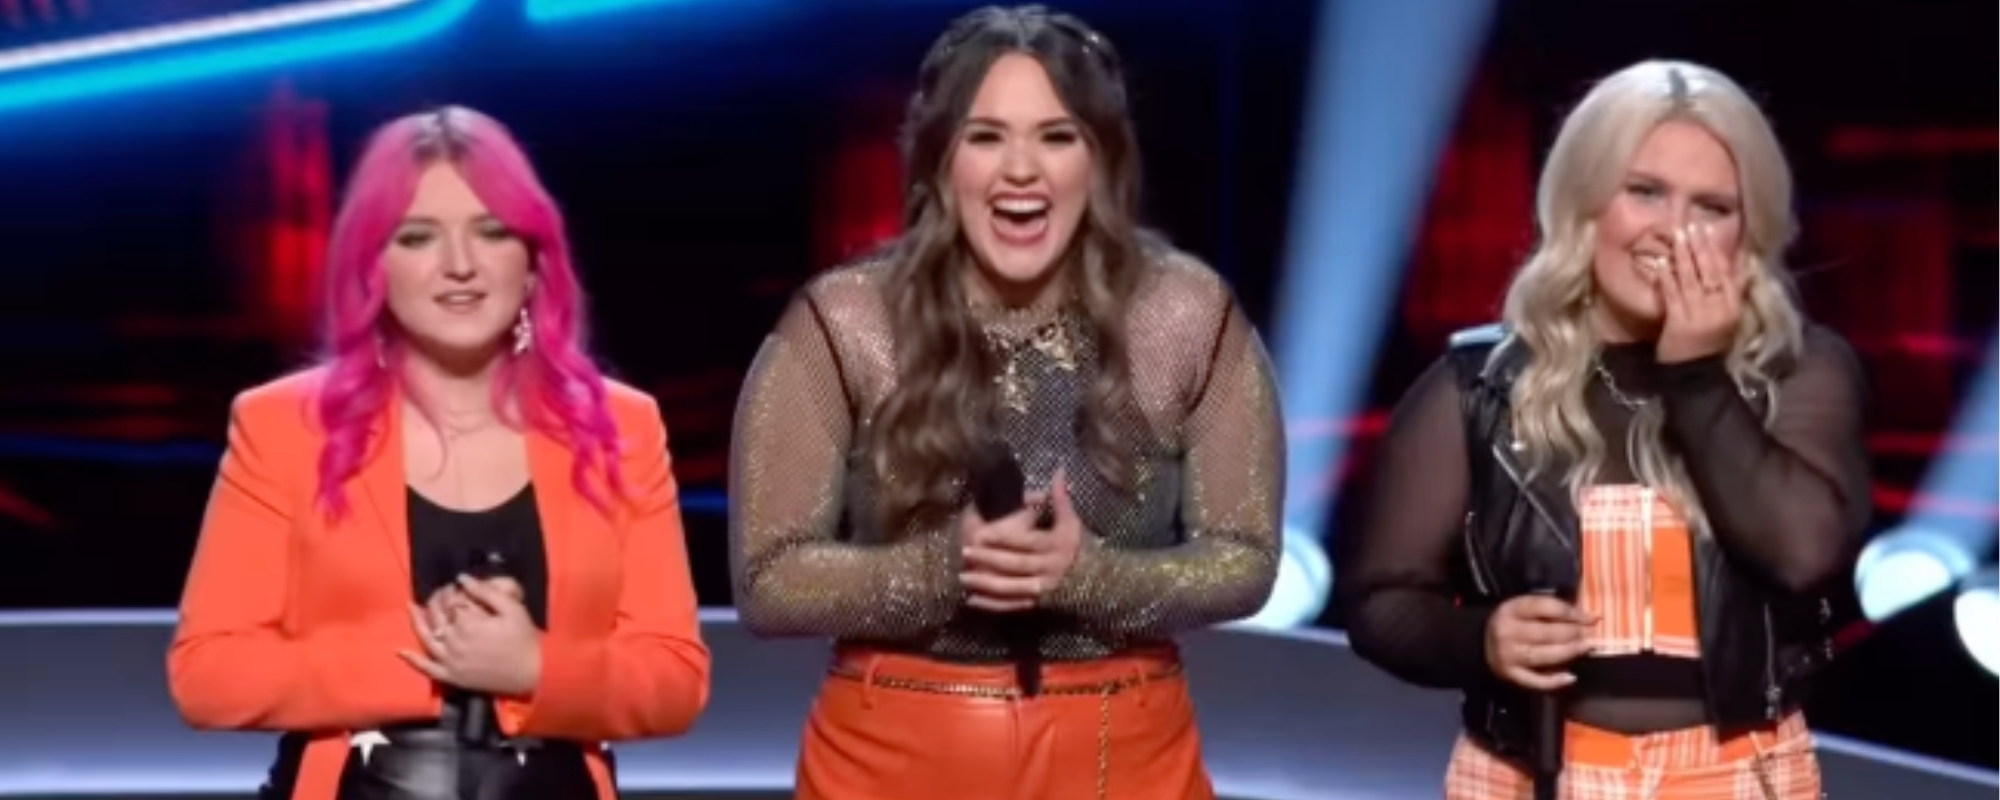 ‘The Voice’ OK3 Finally Reveals Which Coach They Will Team With After 4-Chair Turn